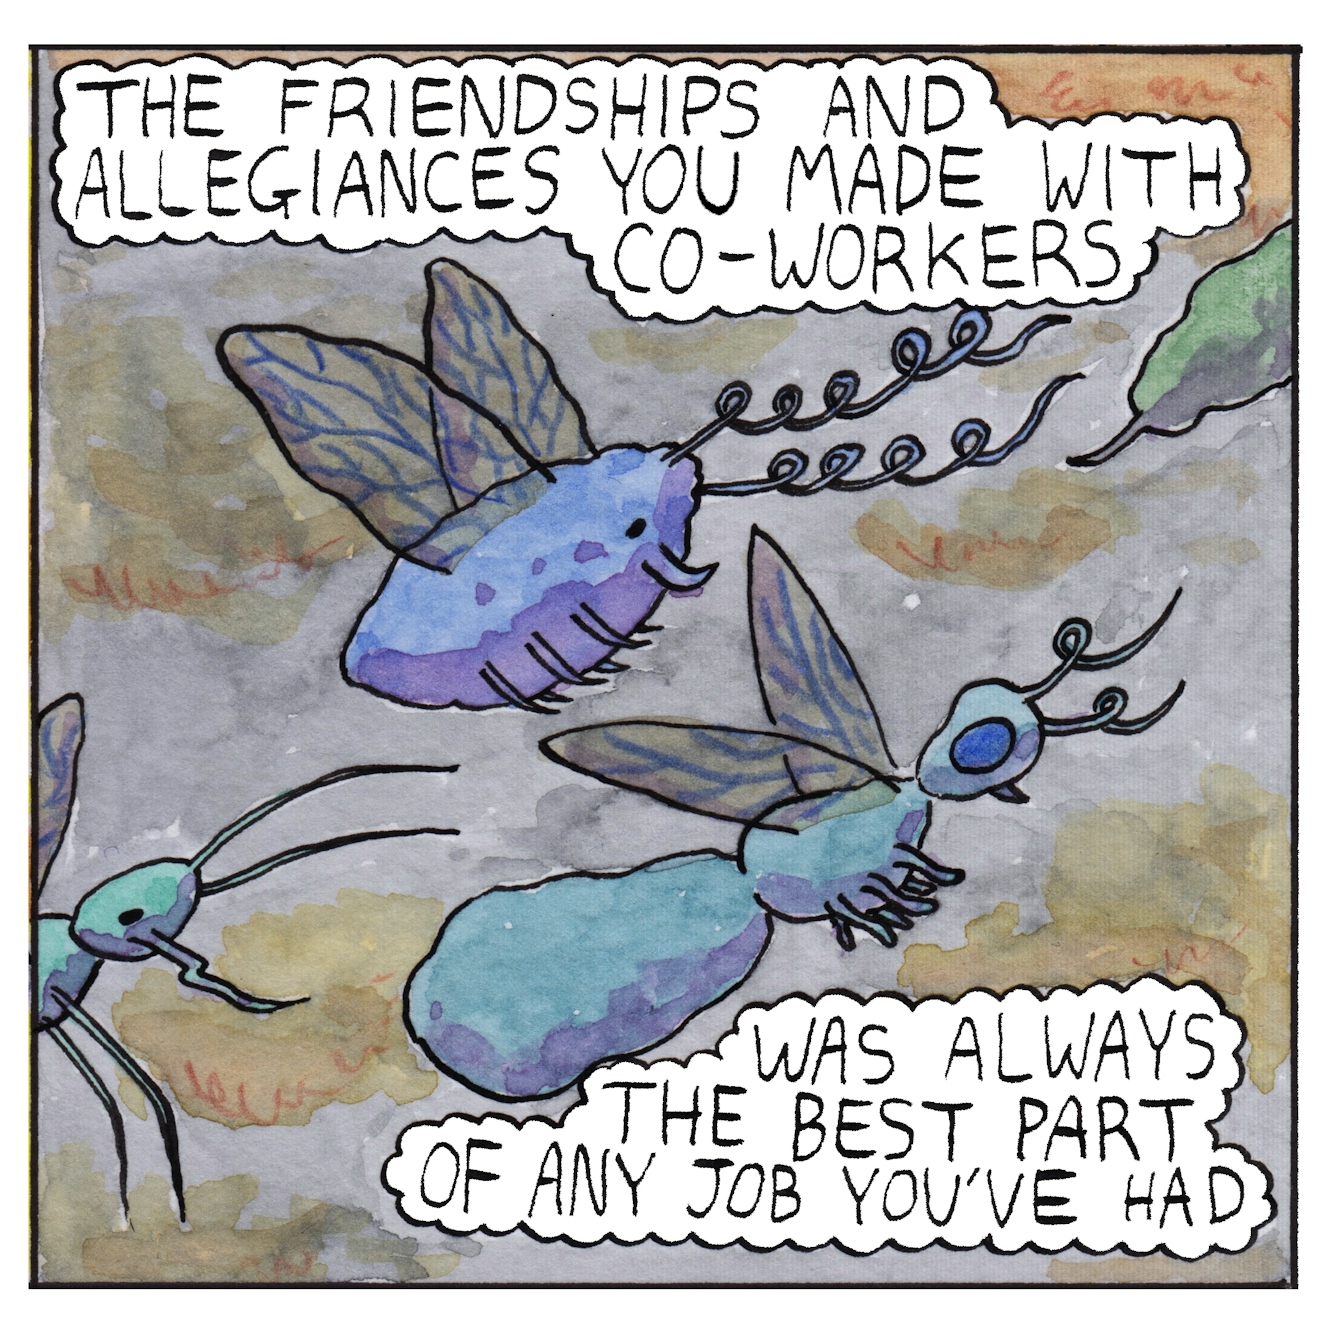 Panel 4 of a six-panel comic made with ink, watercolour and colour pencils: Two different types of insect flying through a grey, cloudy sky fill most of the panel, with others infront and behind them. Two text bubbles top and bottom of the panel read: “The friendships and allegiances you made with co-workers was always the best part of any job you’ve had”